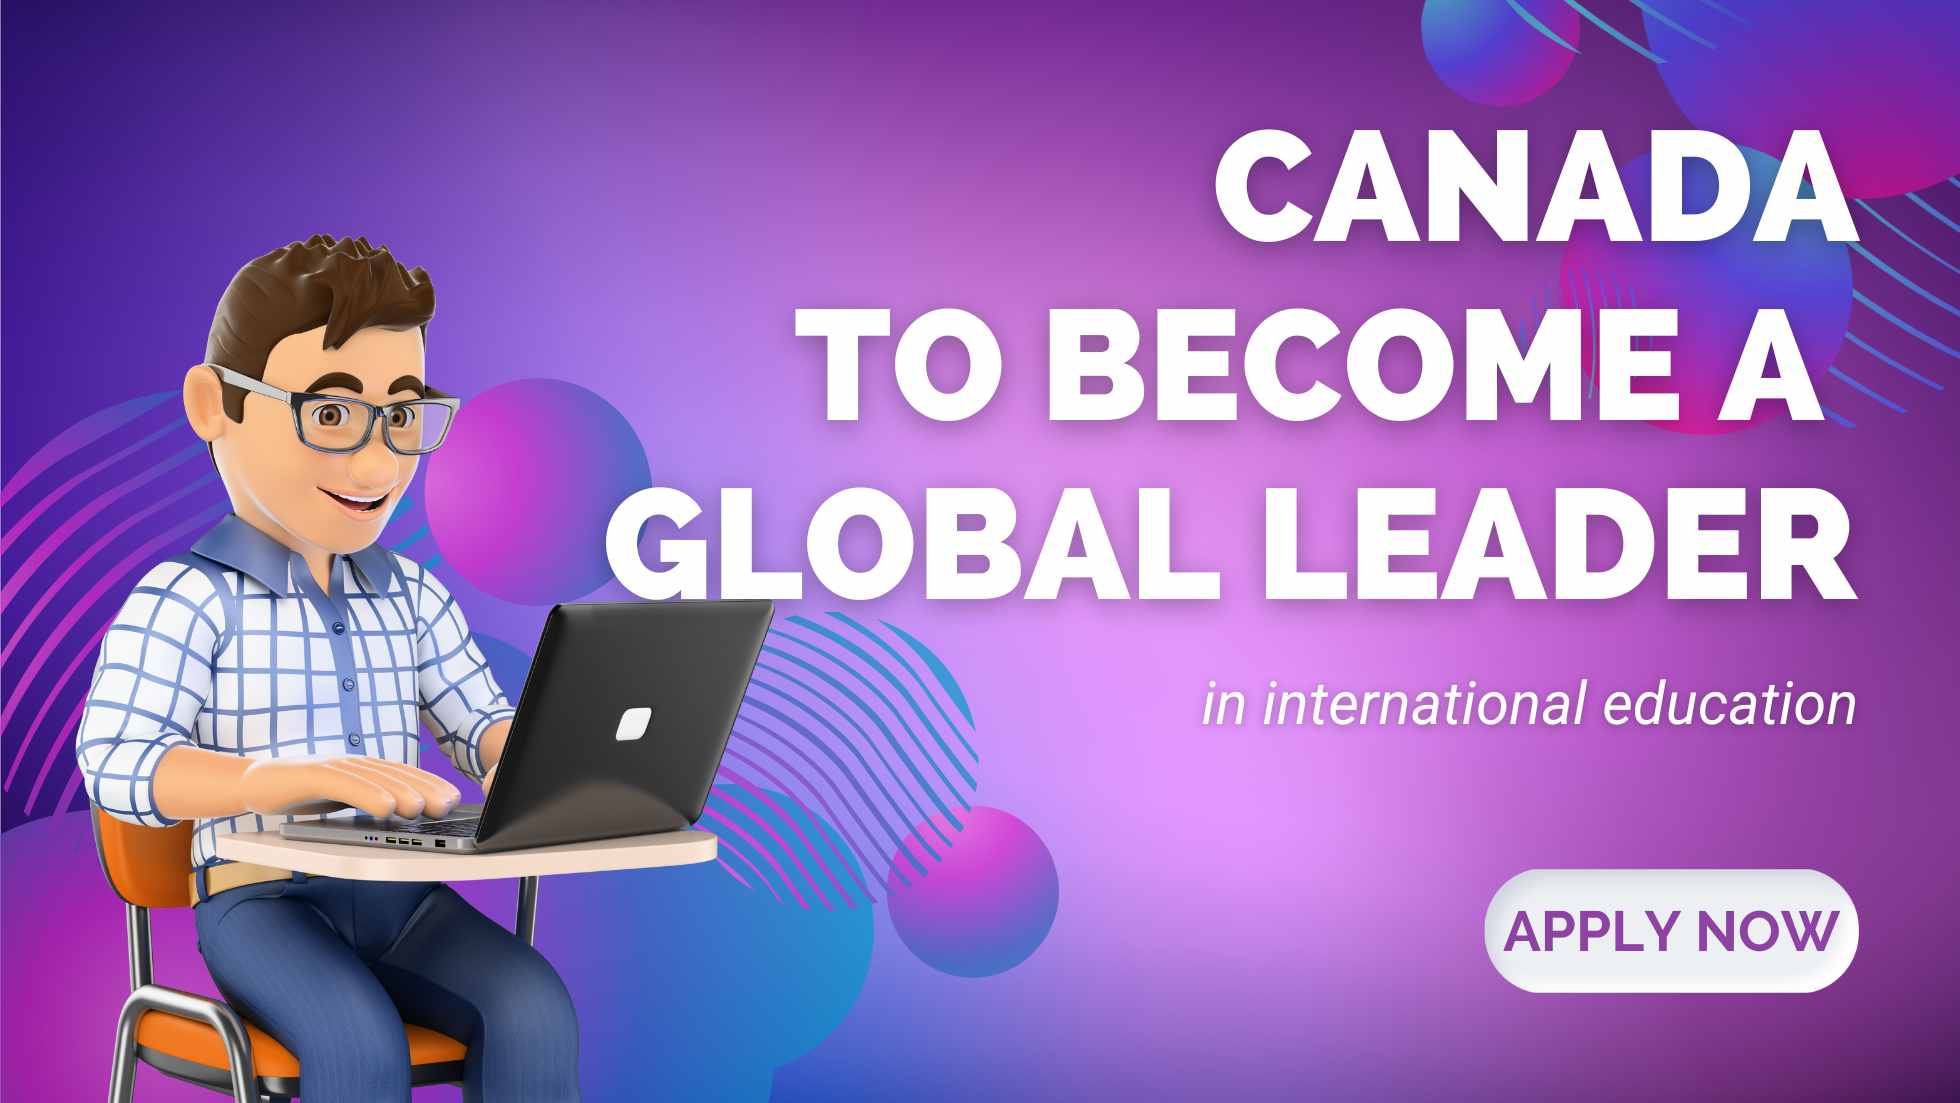 Canada is on track to become a global leader in international education